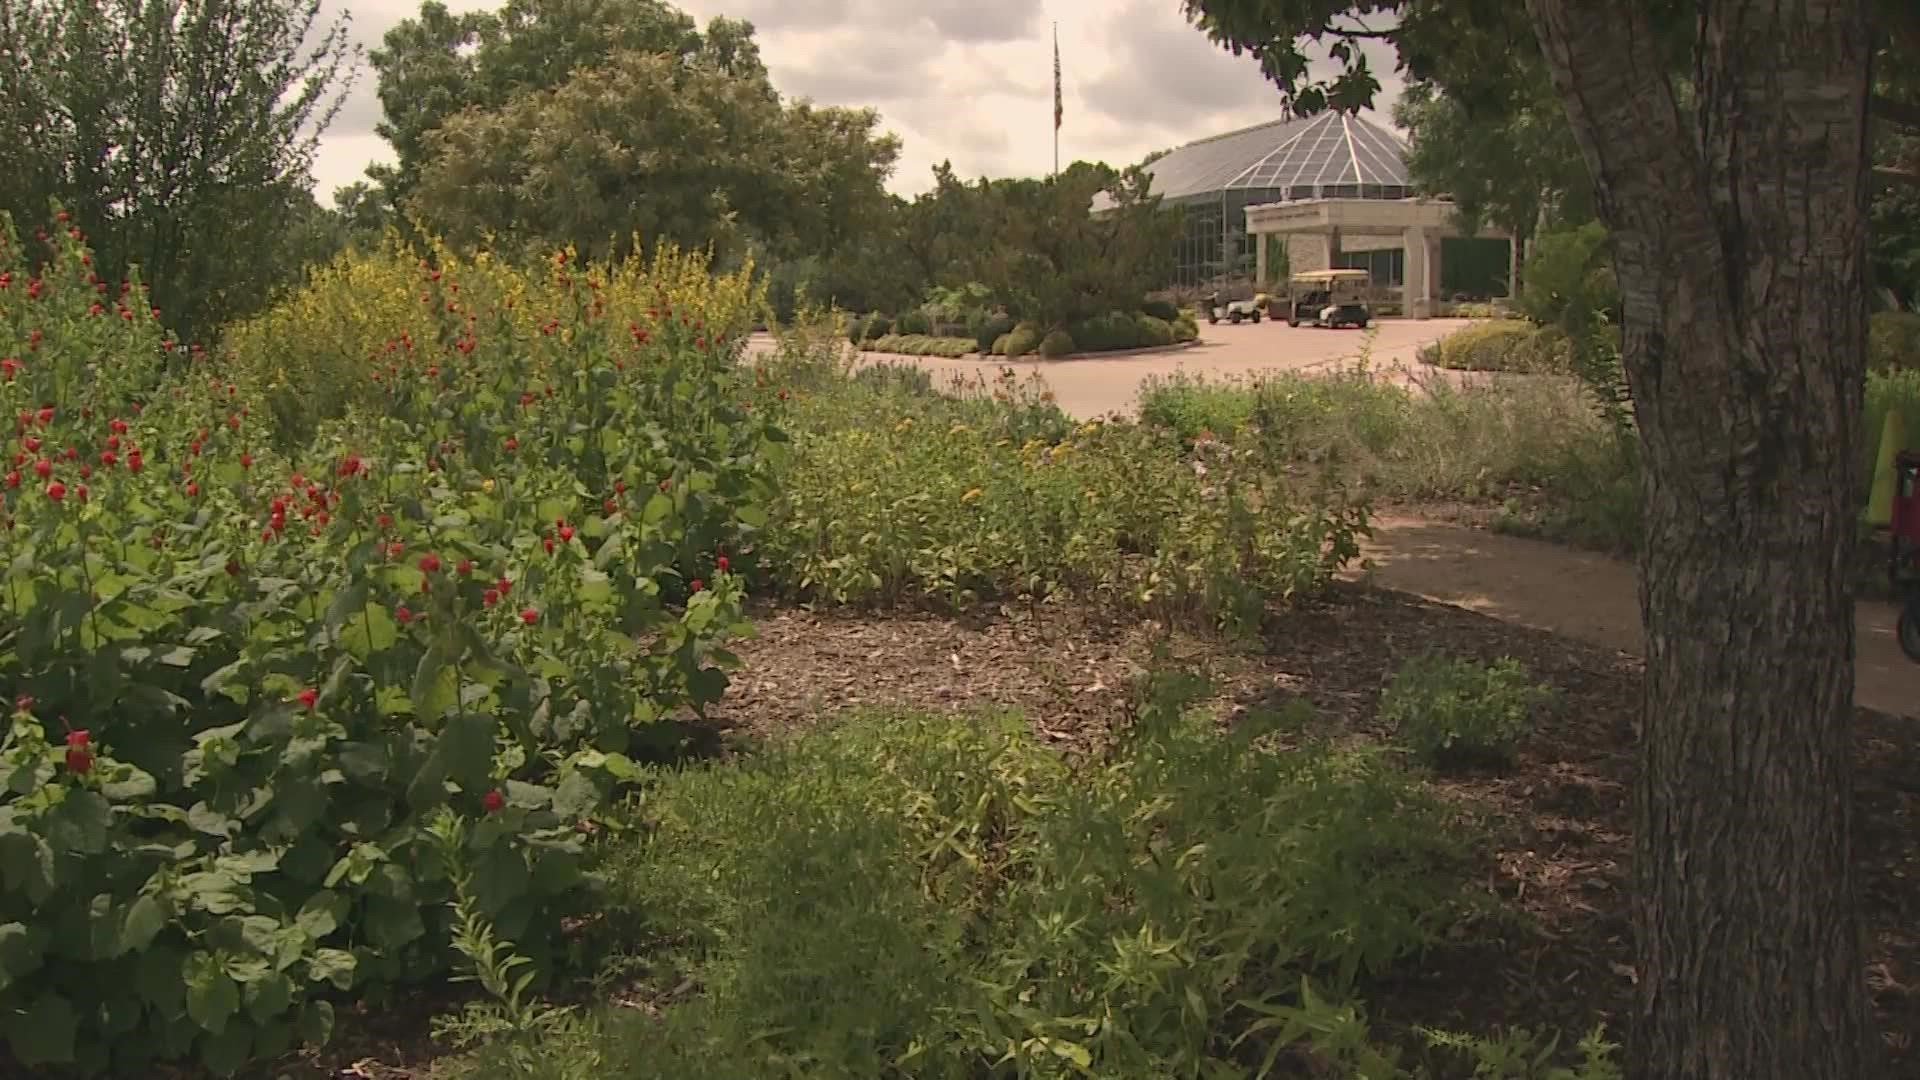 The Fort Worth Botanic Garden held one of its final public comment meetings Wednesday to get feedback on its plans to resign and reshape the grounds.